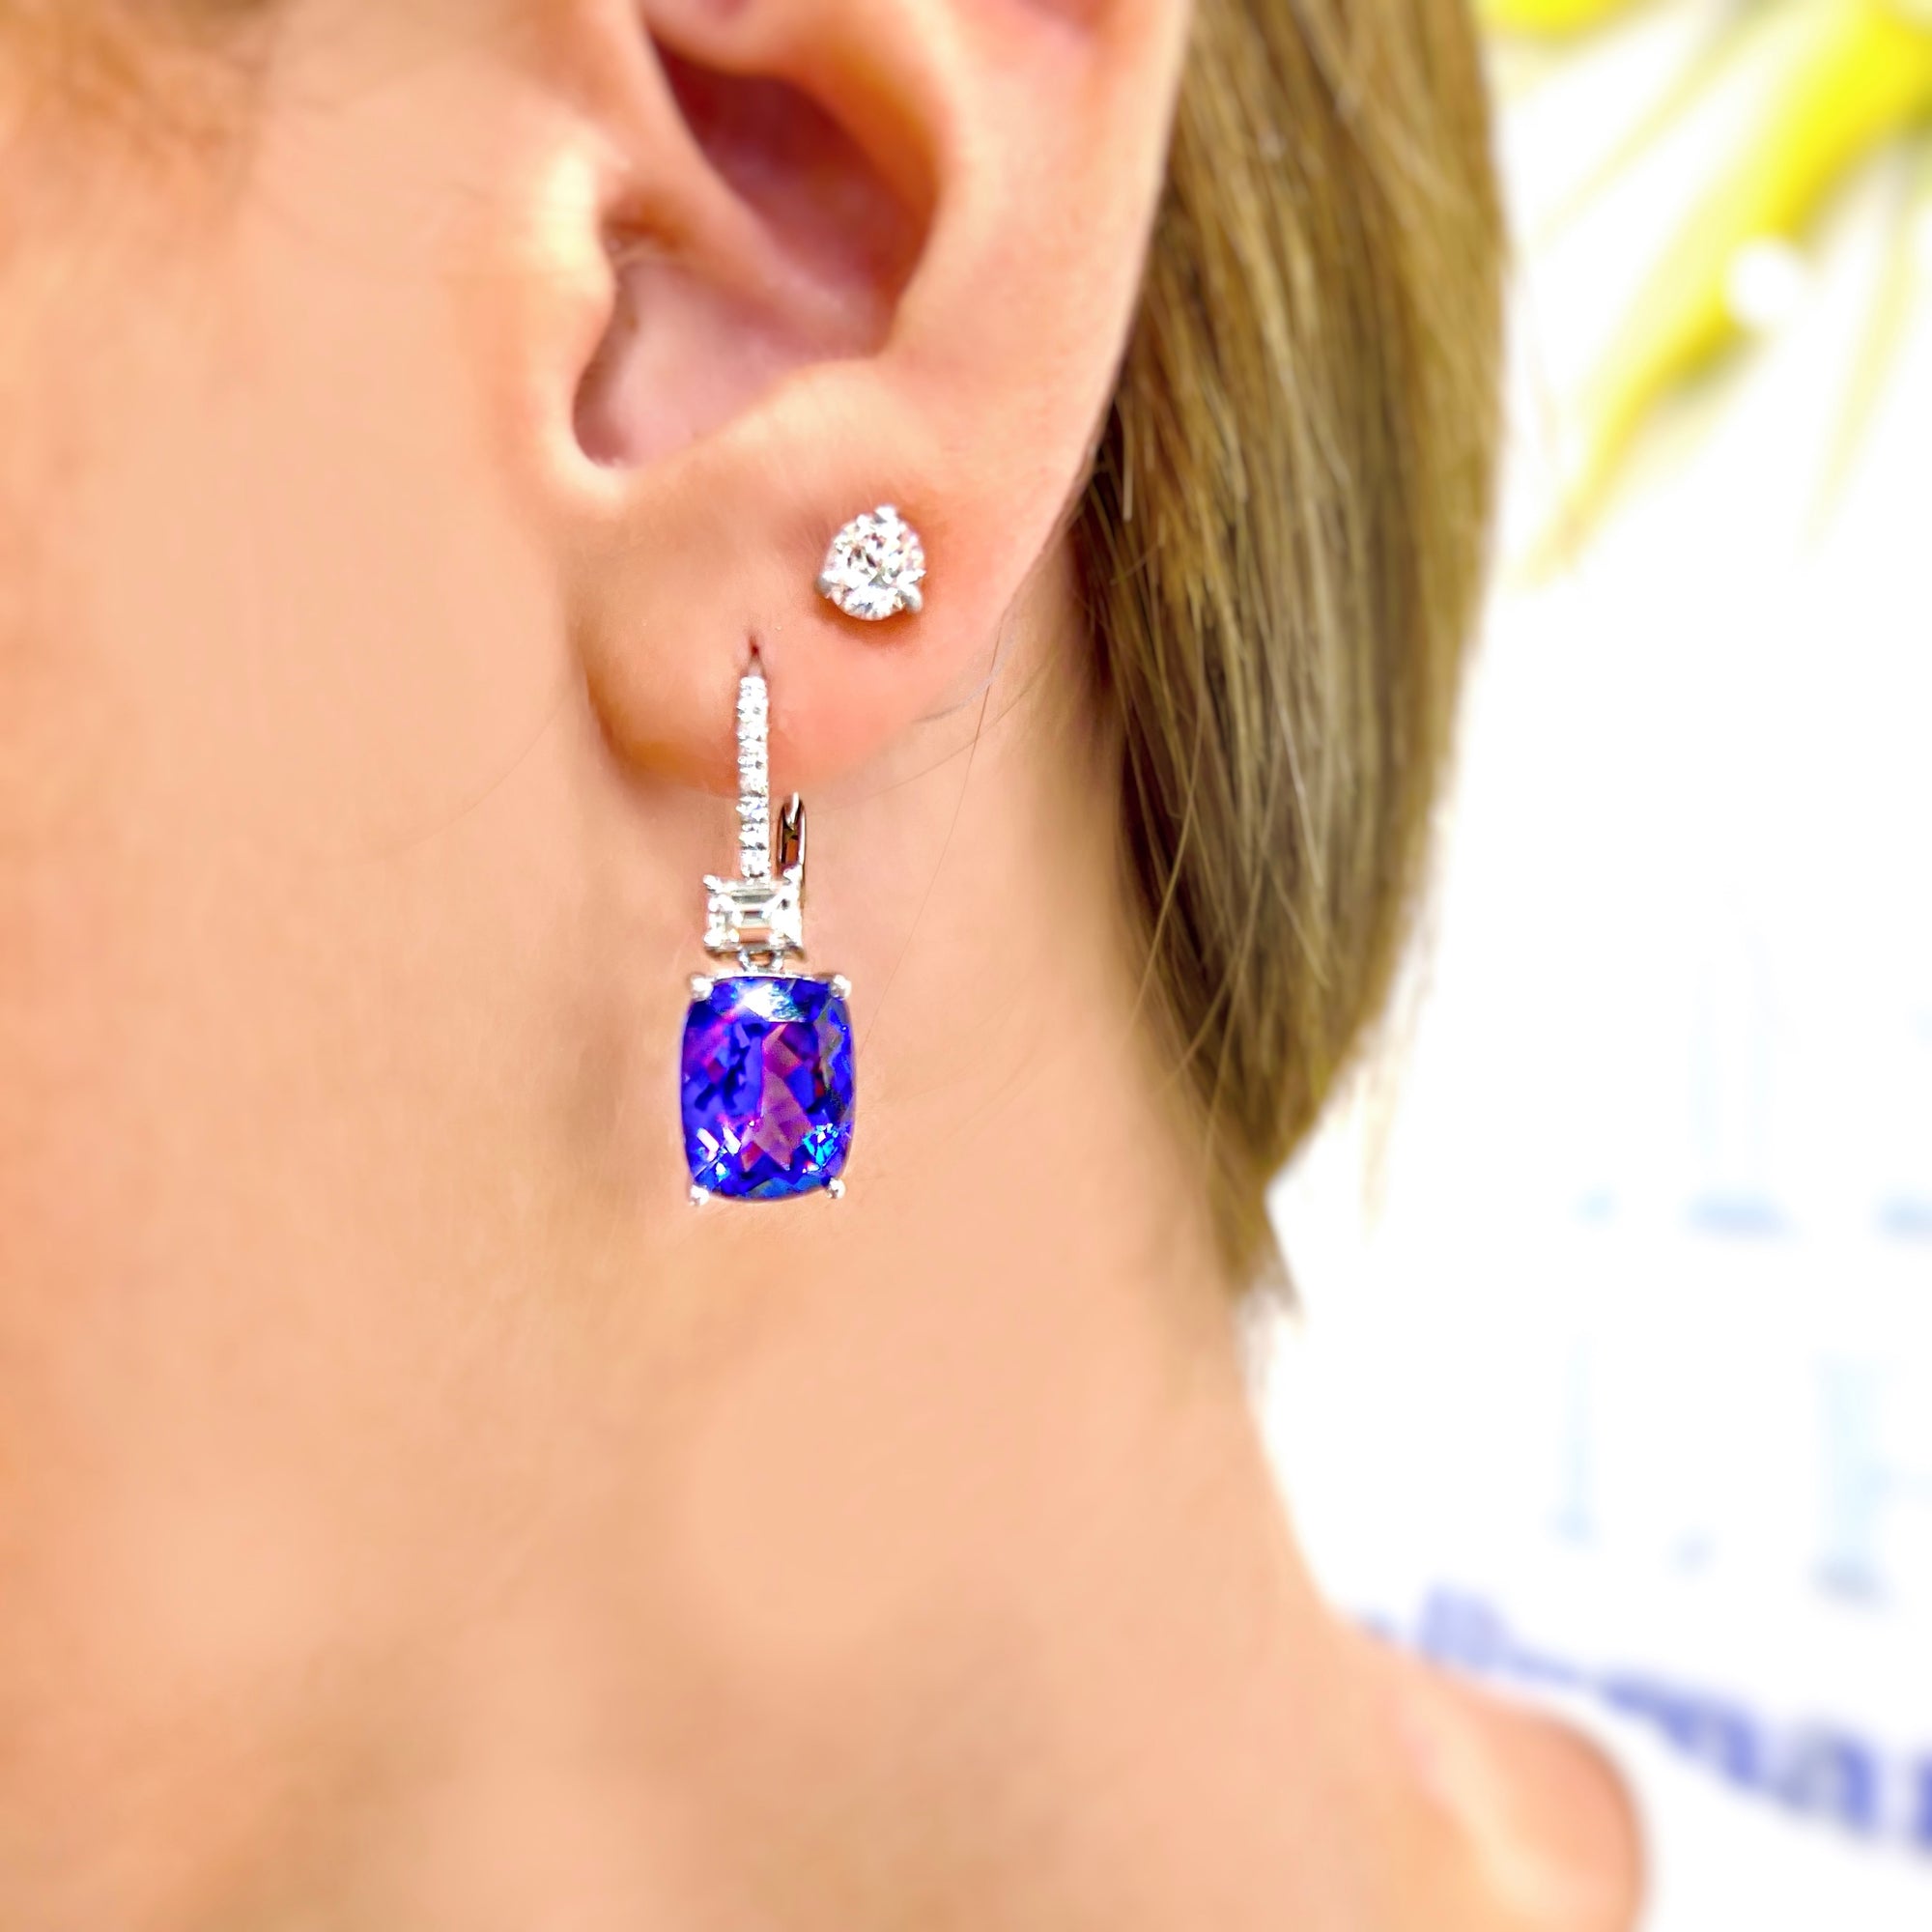 Tanzanite & Diamond Wing Earrings by Yael available at Talisman Collection Fine Jewelers in El Dorado Hills, CA and online. These swoon-worthy tanzanite earrings are so striking you'll never want to take them off! Featuring 8.73 cts of emerald-cut tanzanites and 0.86 ct of round white diamonds set in 18k white gold. True stunners and beautifully crafted, they are a timeless addition to your collection.